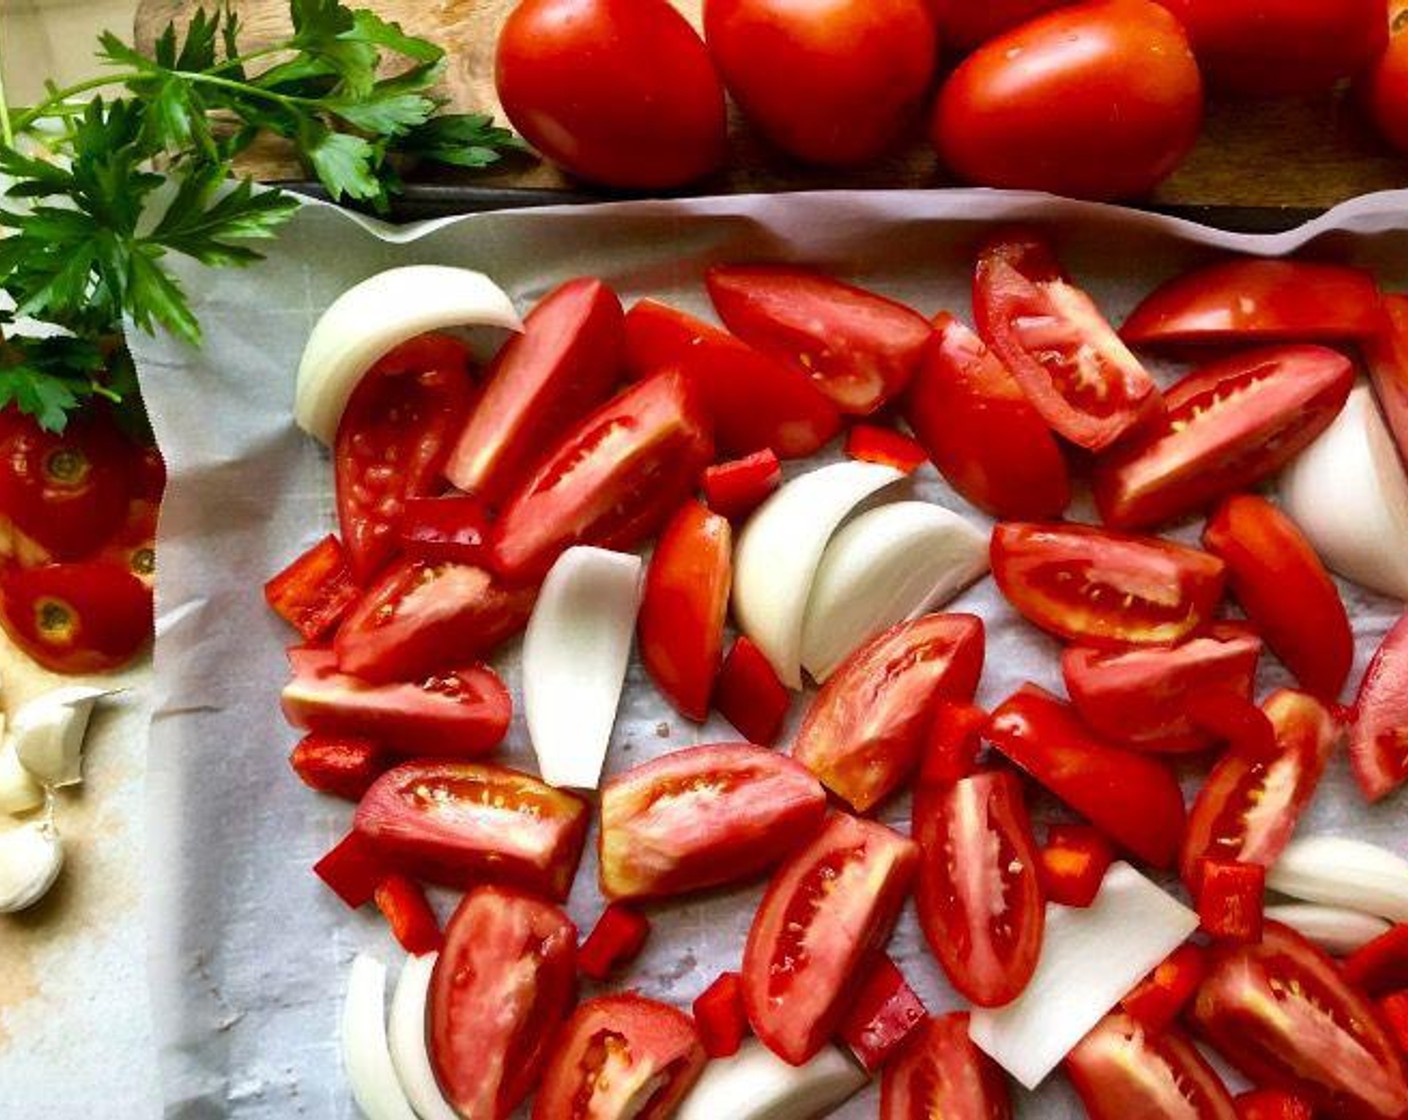 step 2 Arrange the Plum Tomatoes (3 lb), Onion (1), cut lengthwise into 8 wedges, and Red Bell Pepper (1/2 cup) in a single layer on the lined baking pans.